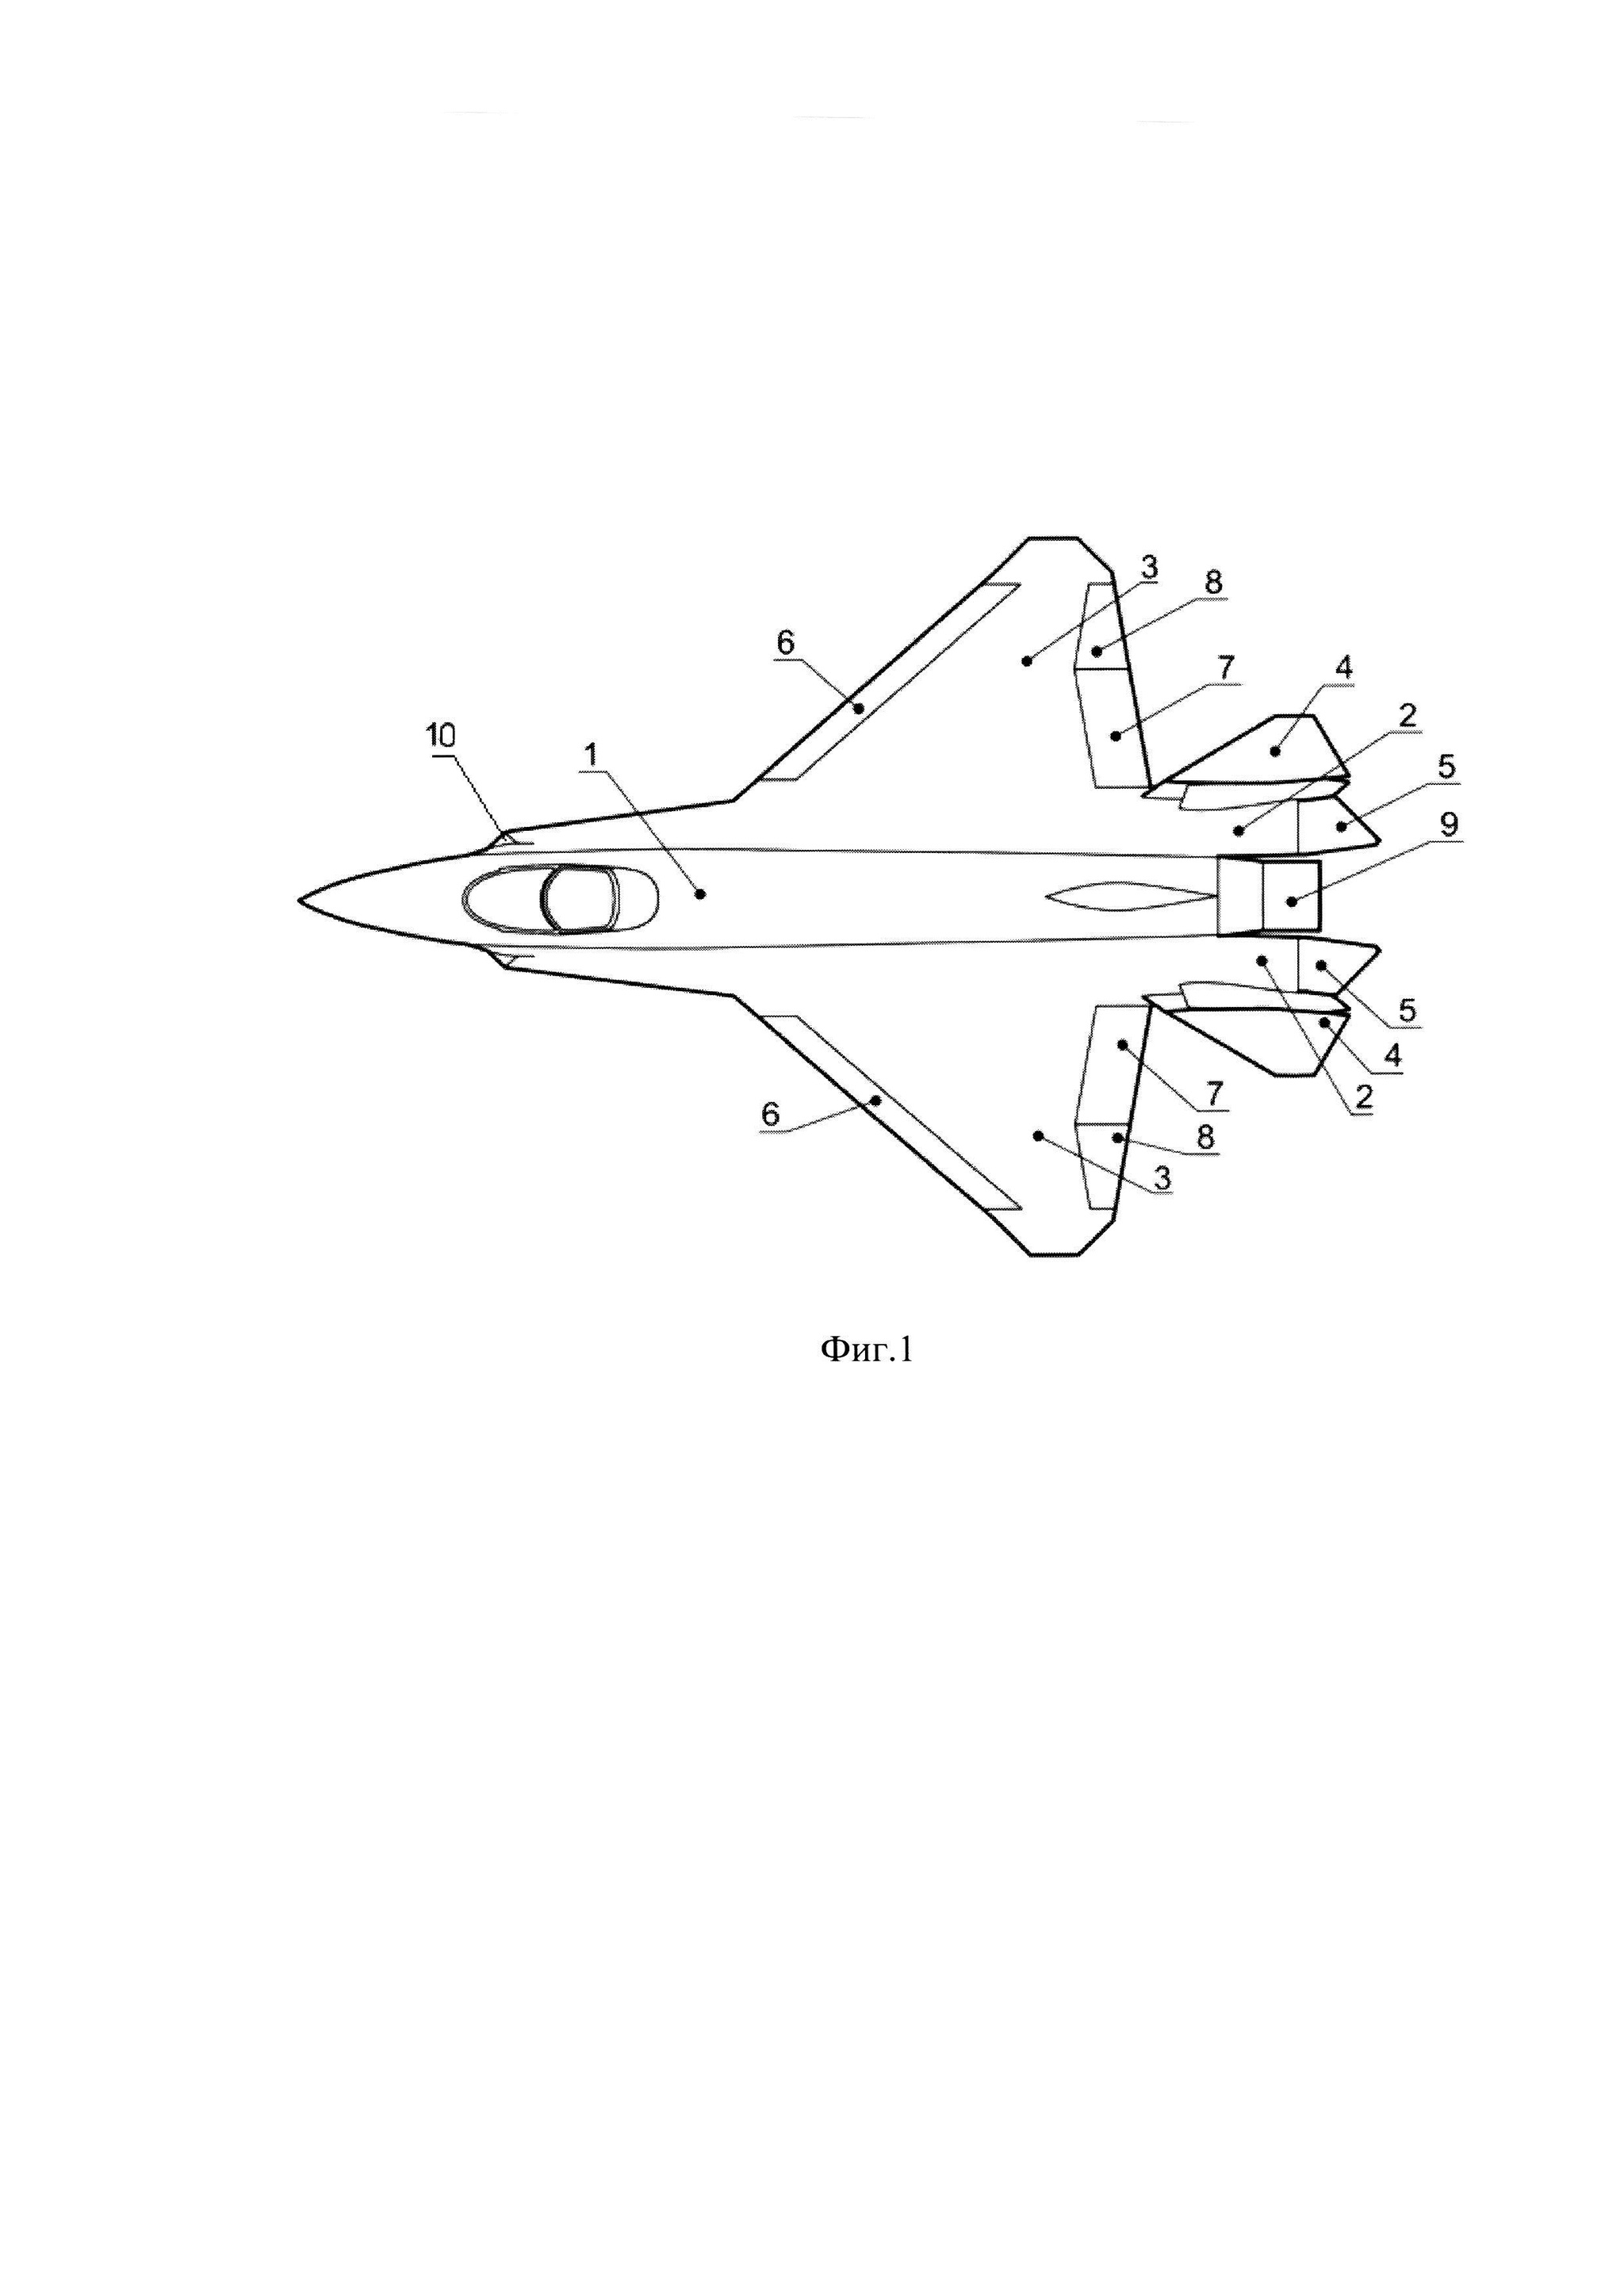 A patent for a light tactical fighter T-75 has been published - Aviation, Rostec, Oak, Fighter, Fifth generation, Su-75, Checkmate, Patent, Russia, Military aviation, Stealth, Longpost